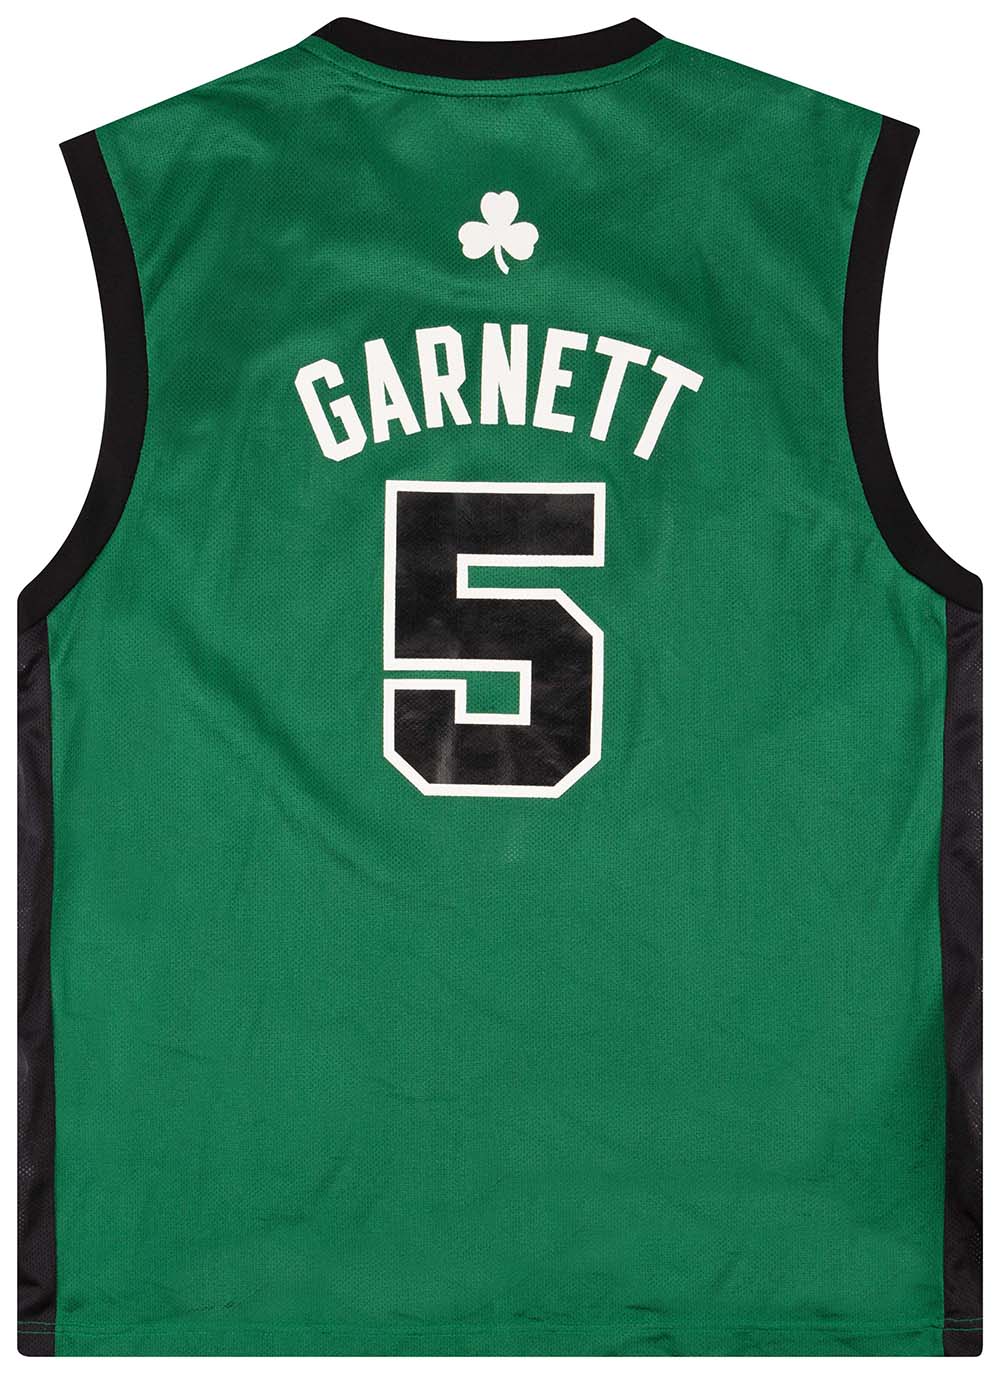 Adidas Throwback Boston Kevin Garnett Jersey for Sale in North